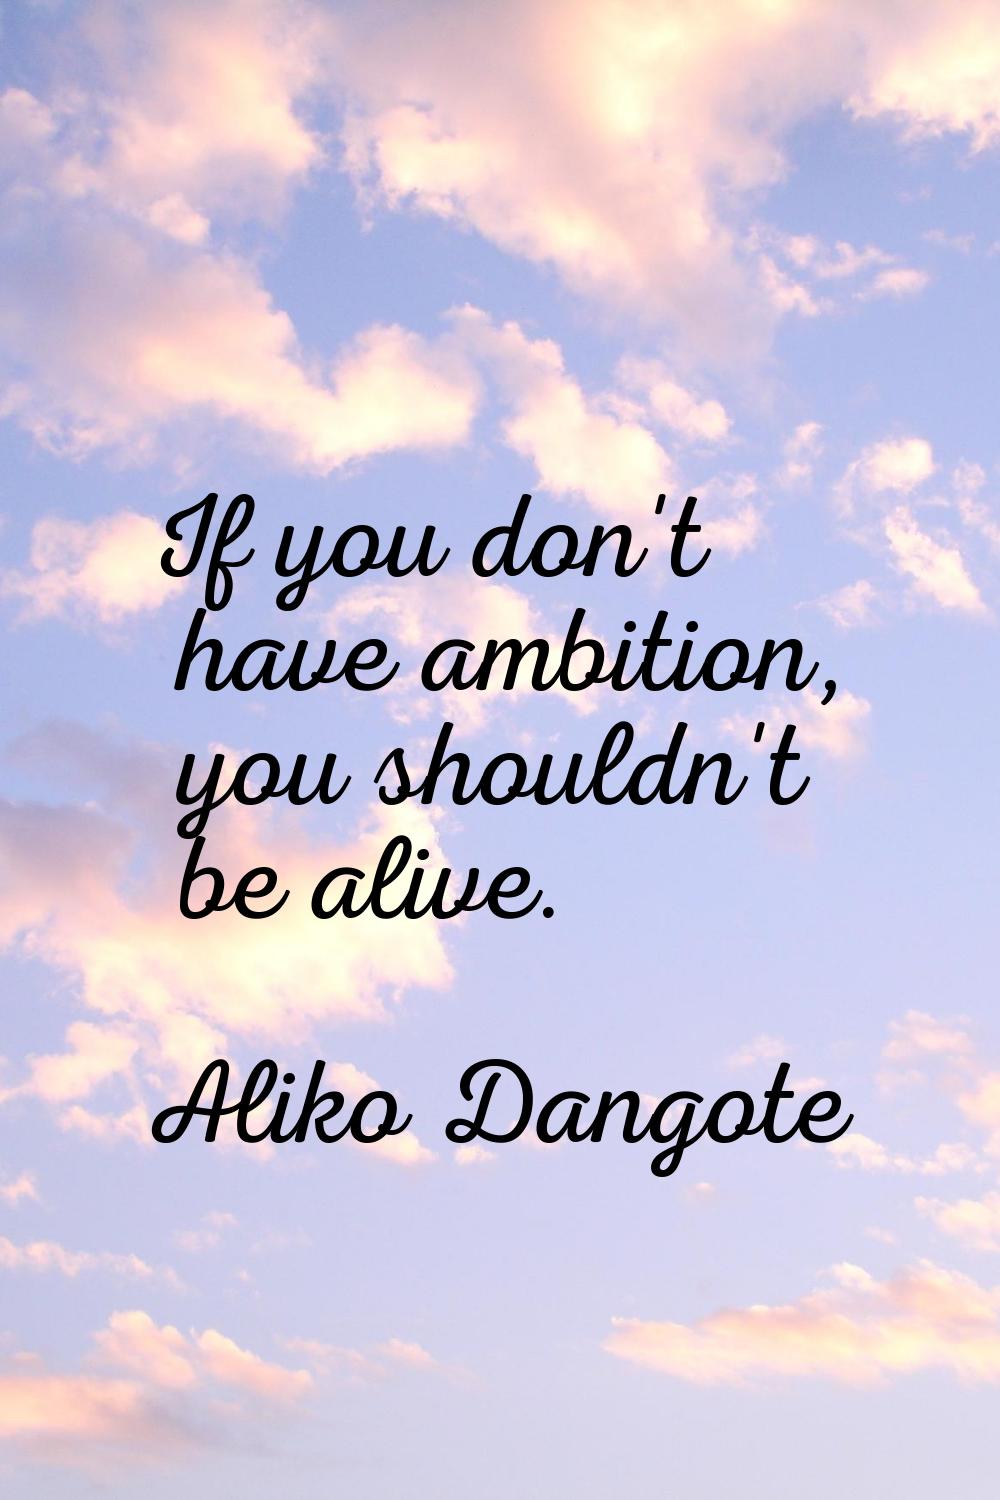 If you don't have ambition, you shouldn't be alive.